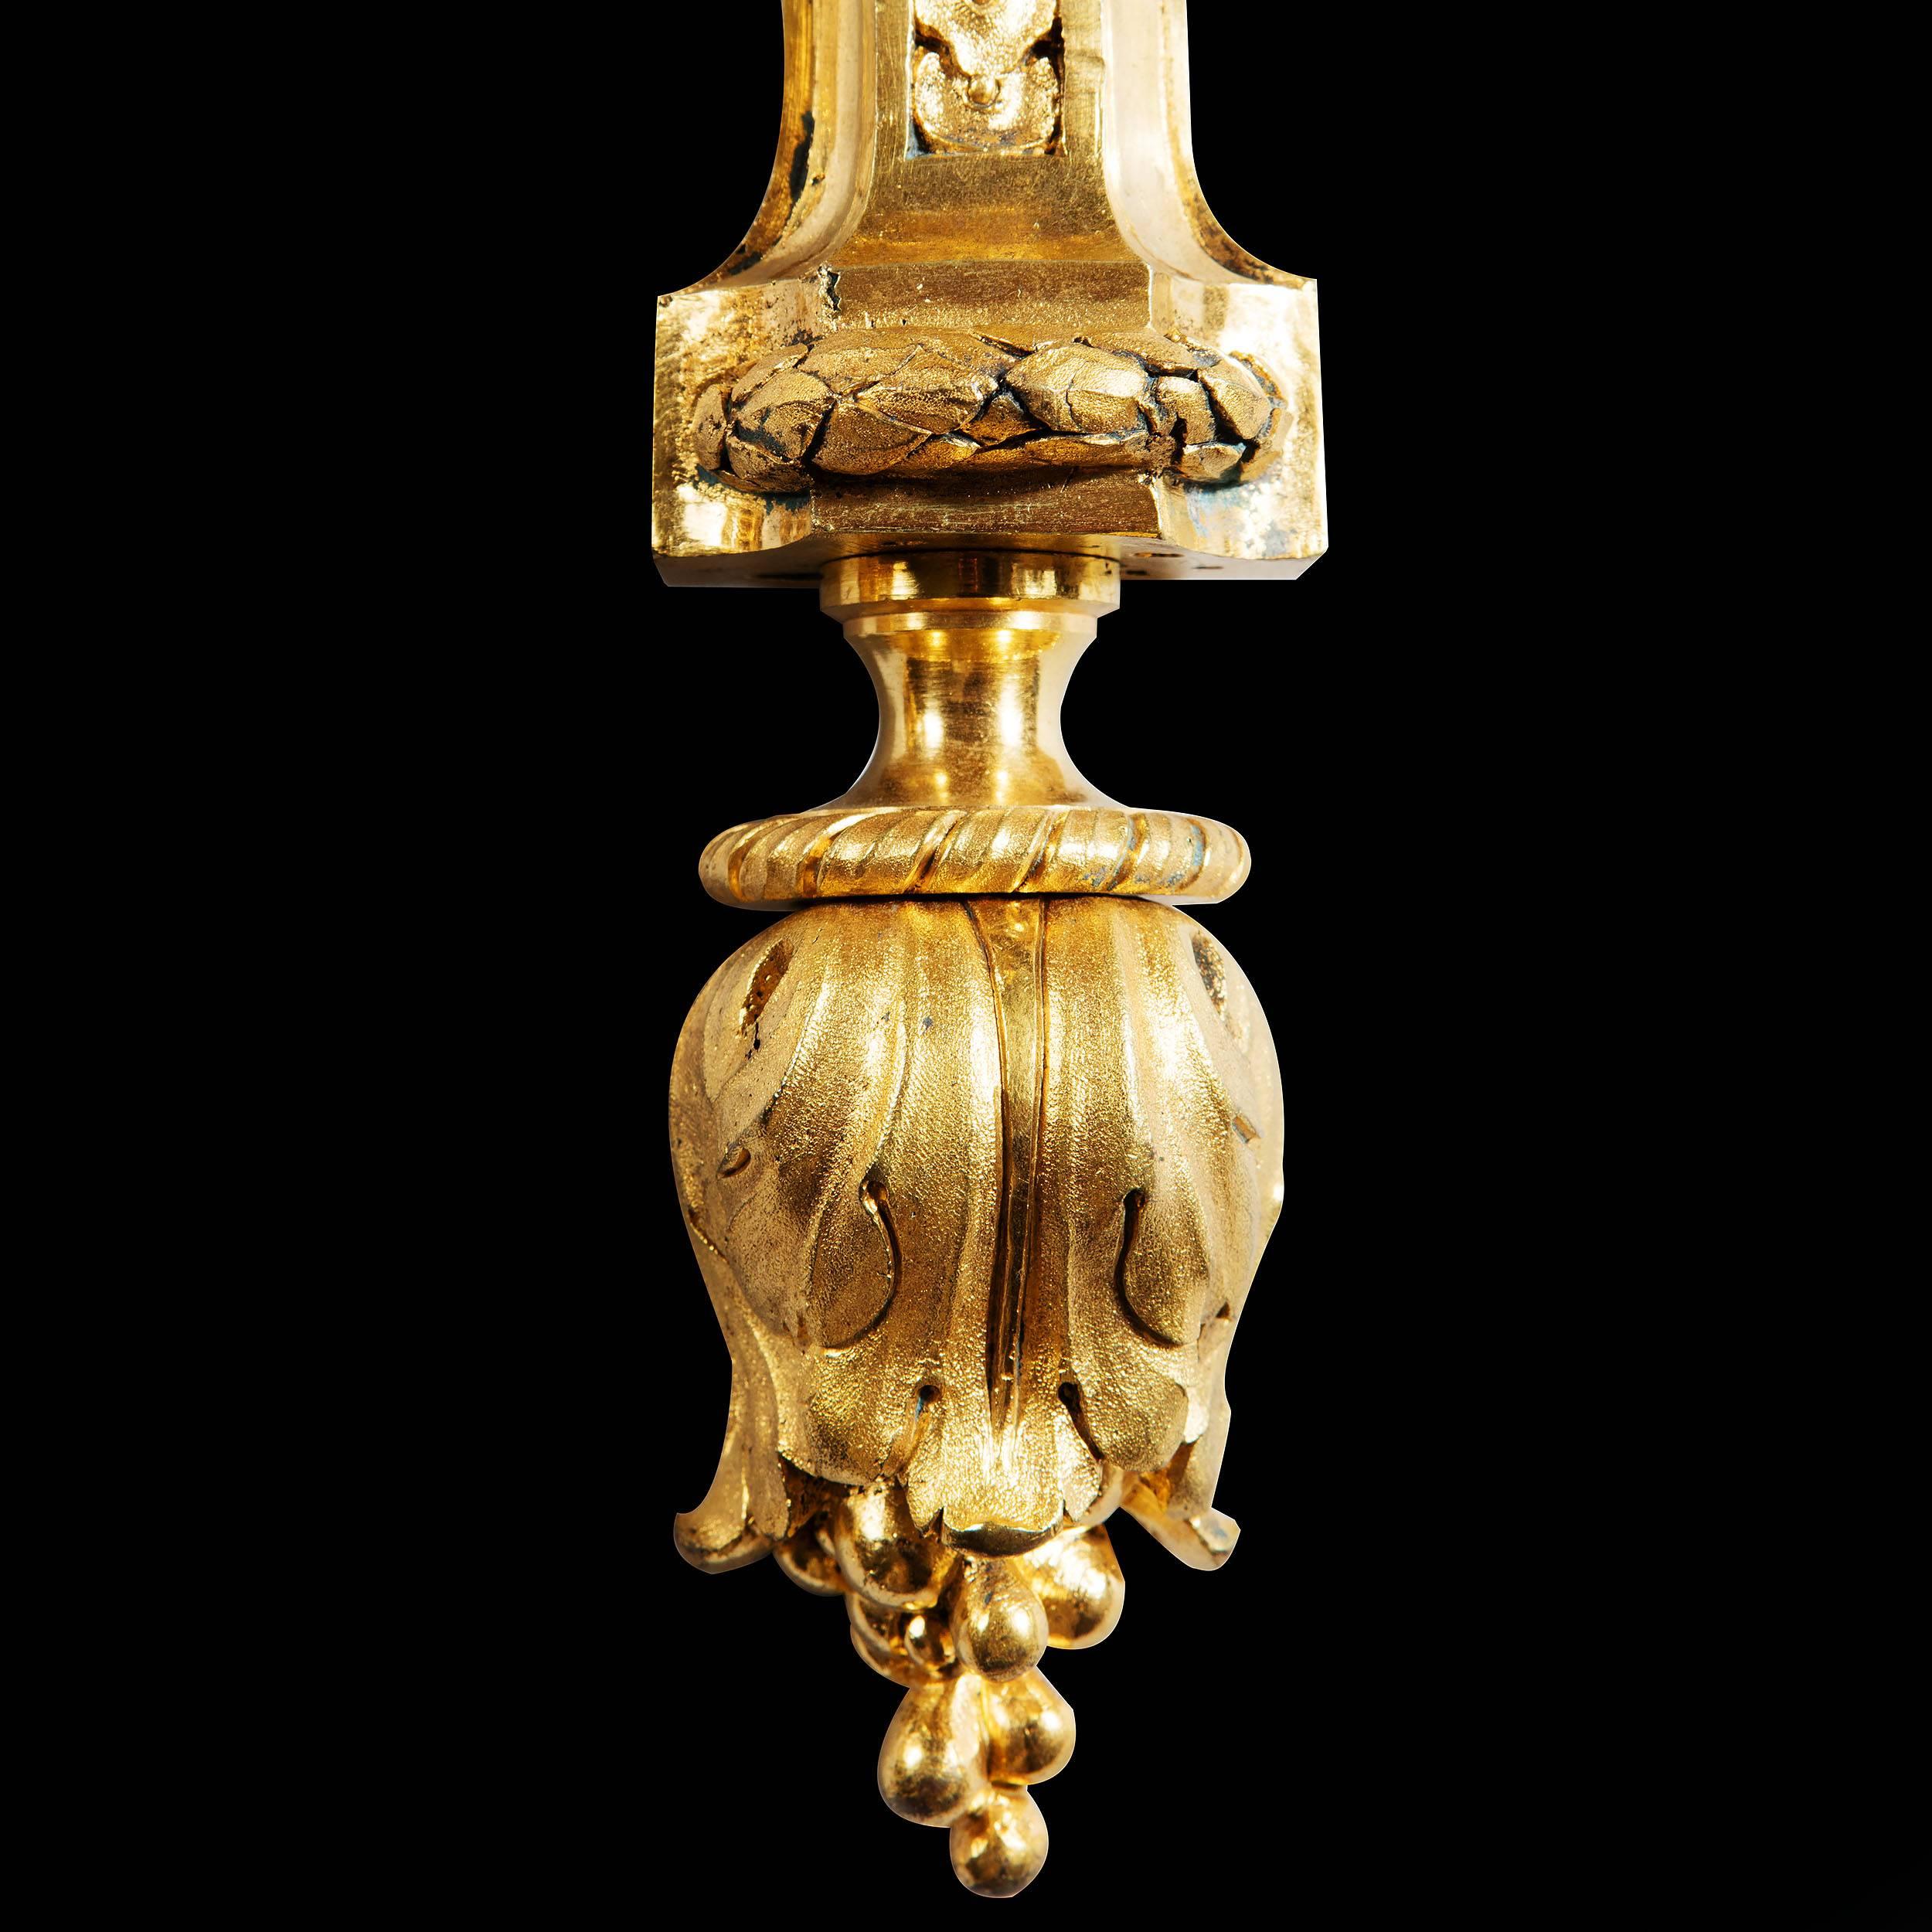 Monumental Pair of Louis XVI Gilt Bronze Wall Sconces Jean-Charles Delafosse In Excellent Condition For Sale In London, by appointment only